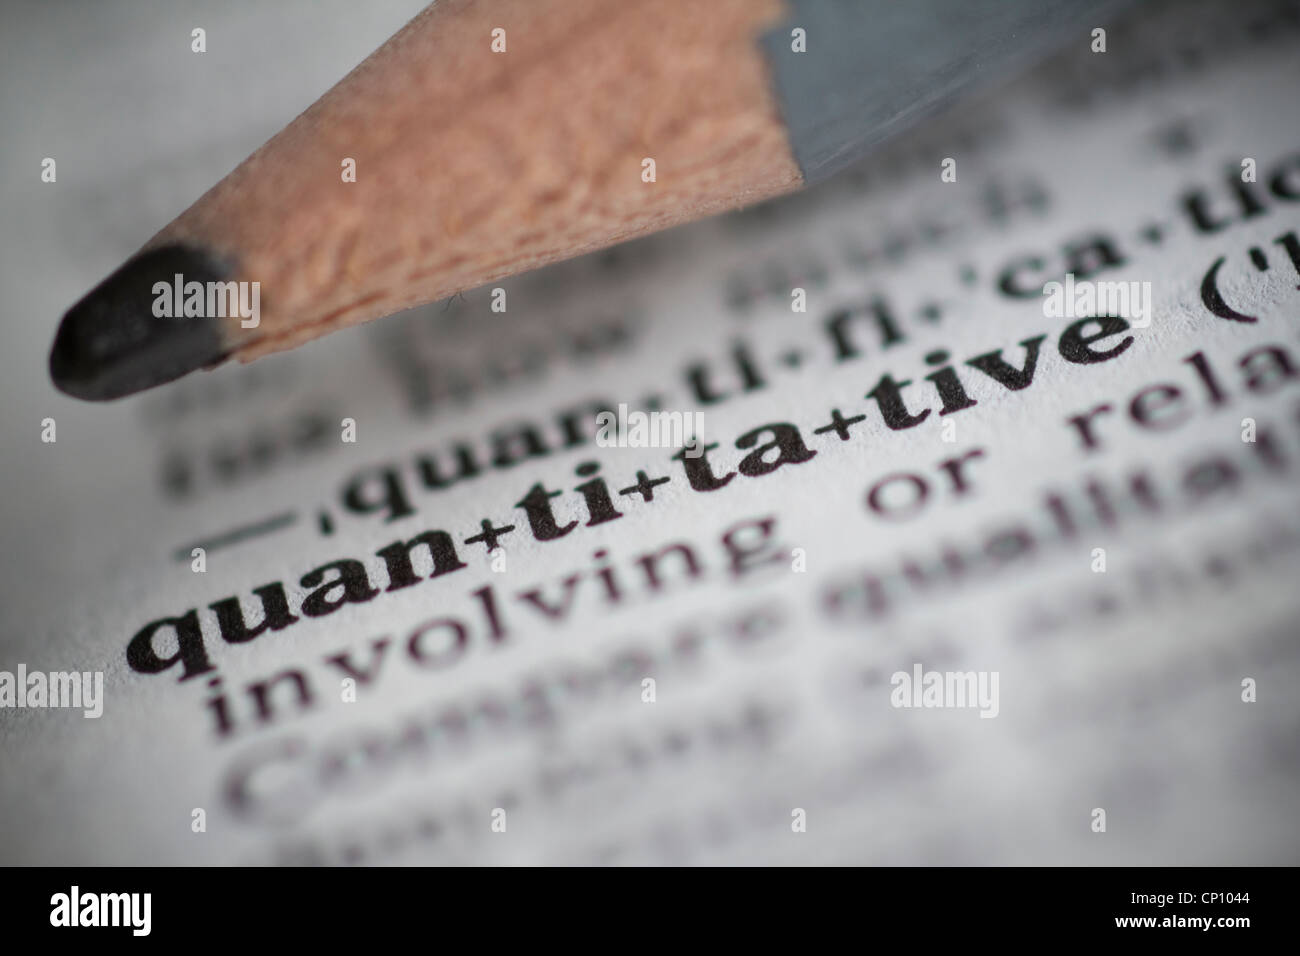 the word quantitative in dictionary to illustrate quantitative easing with pencil Stock Photo